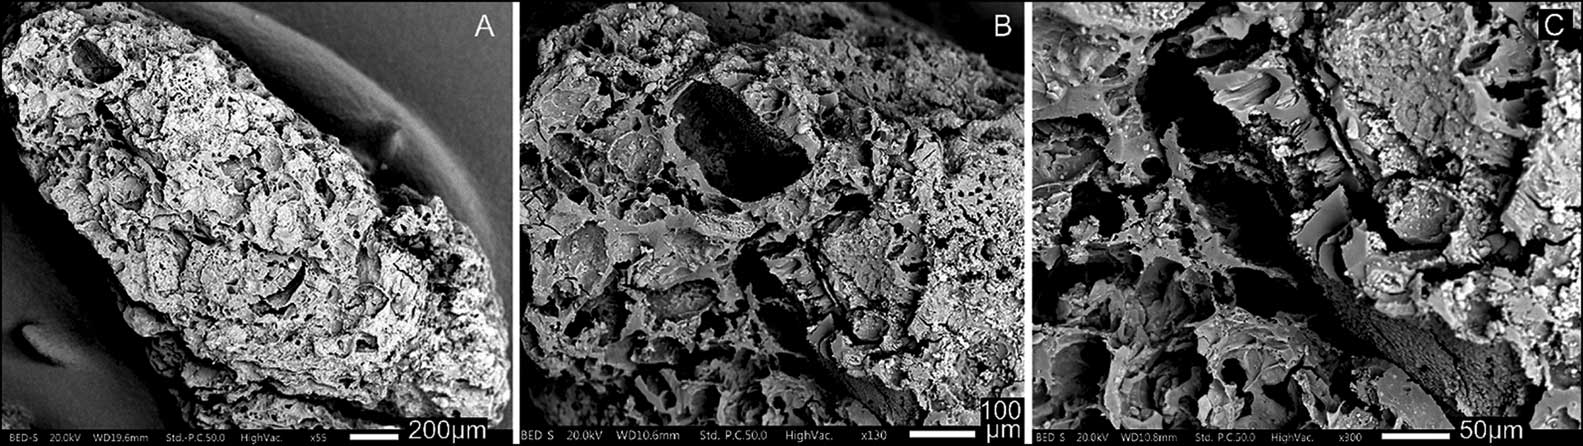 Three panels showing different magnification micrographs of charred mixture